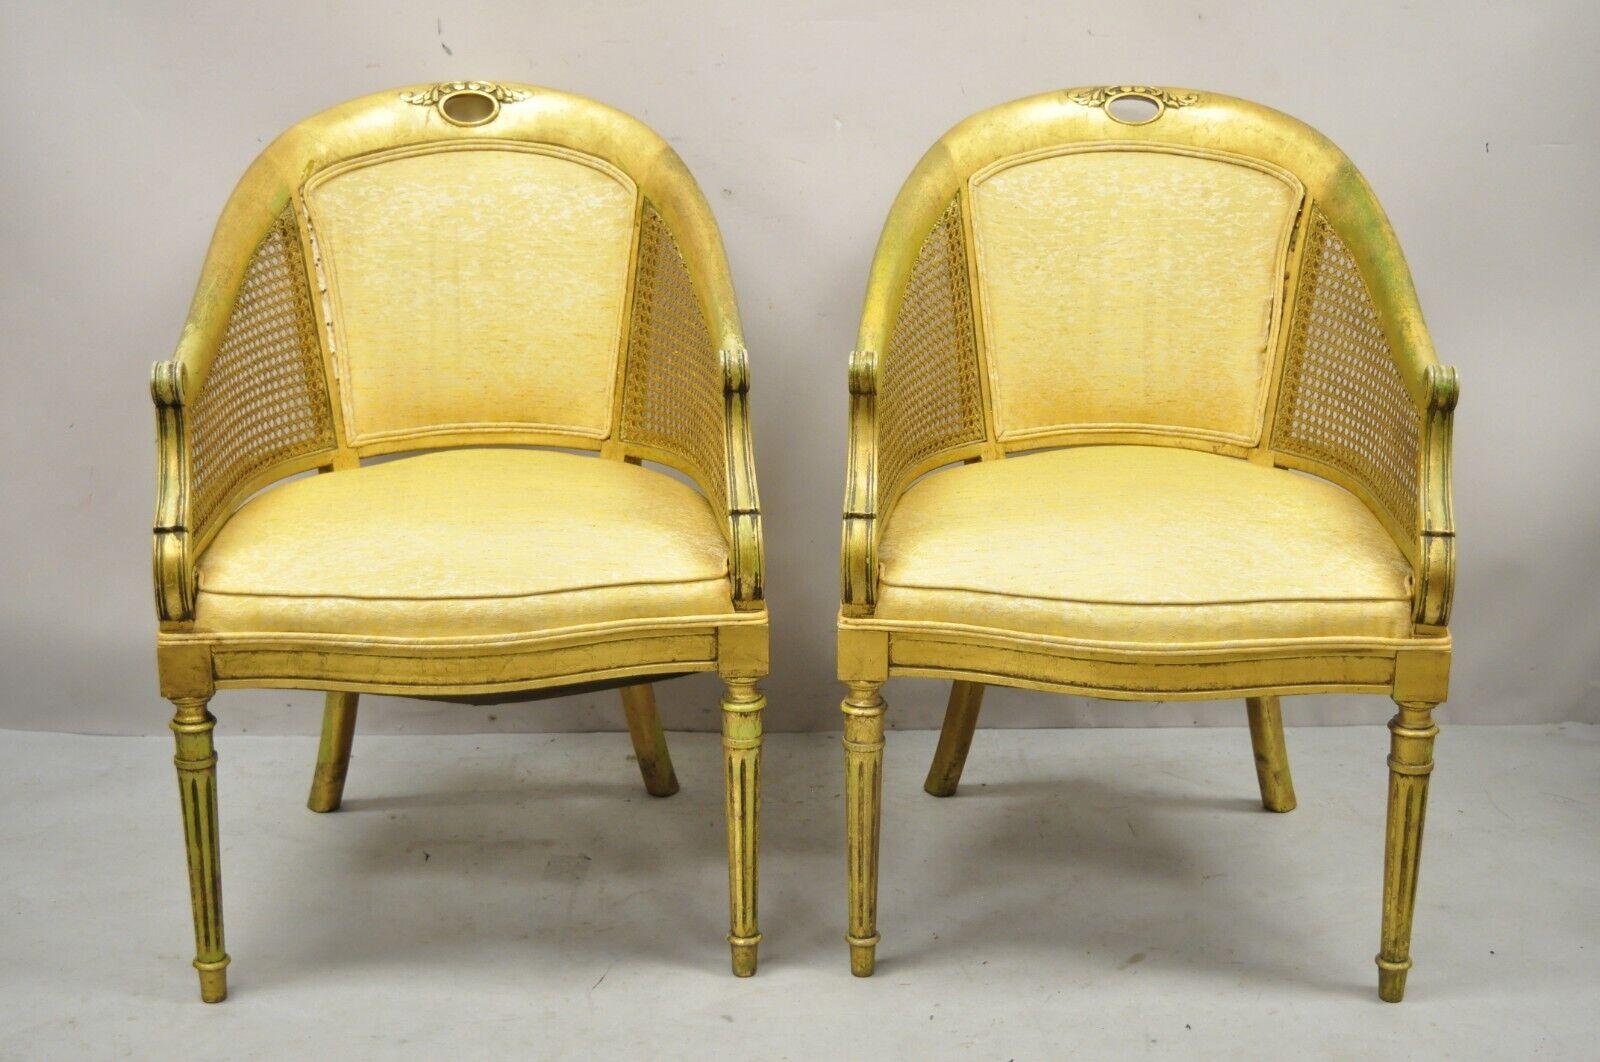 Vintage French Hollywood Regency gold gilt barrel back cane lounge chairs - a pair. Item features cane arm panels, solid wood frames, distressed finish, tapered legs, very nice vintage pair, great style and form. Circa mid-20th